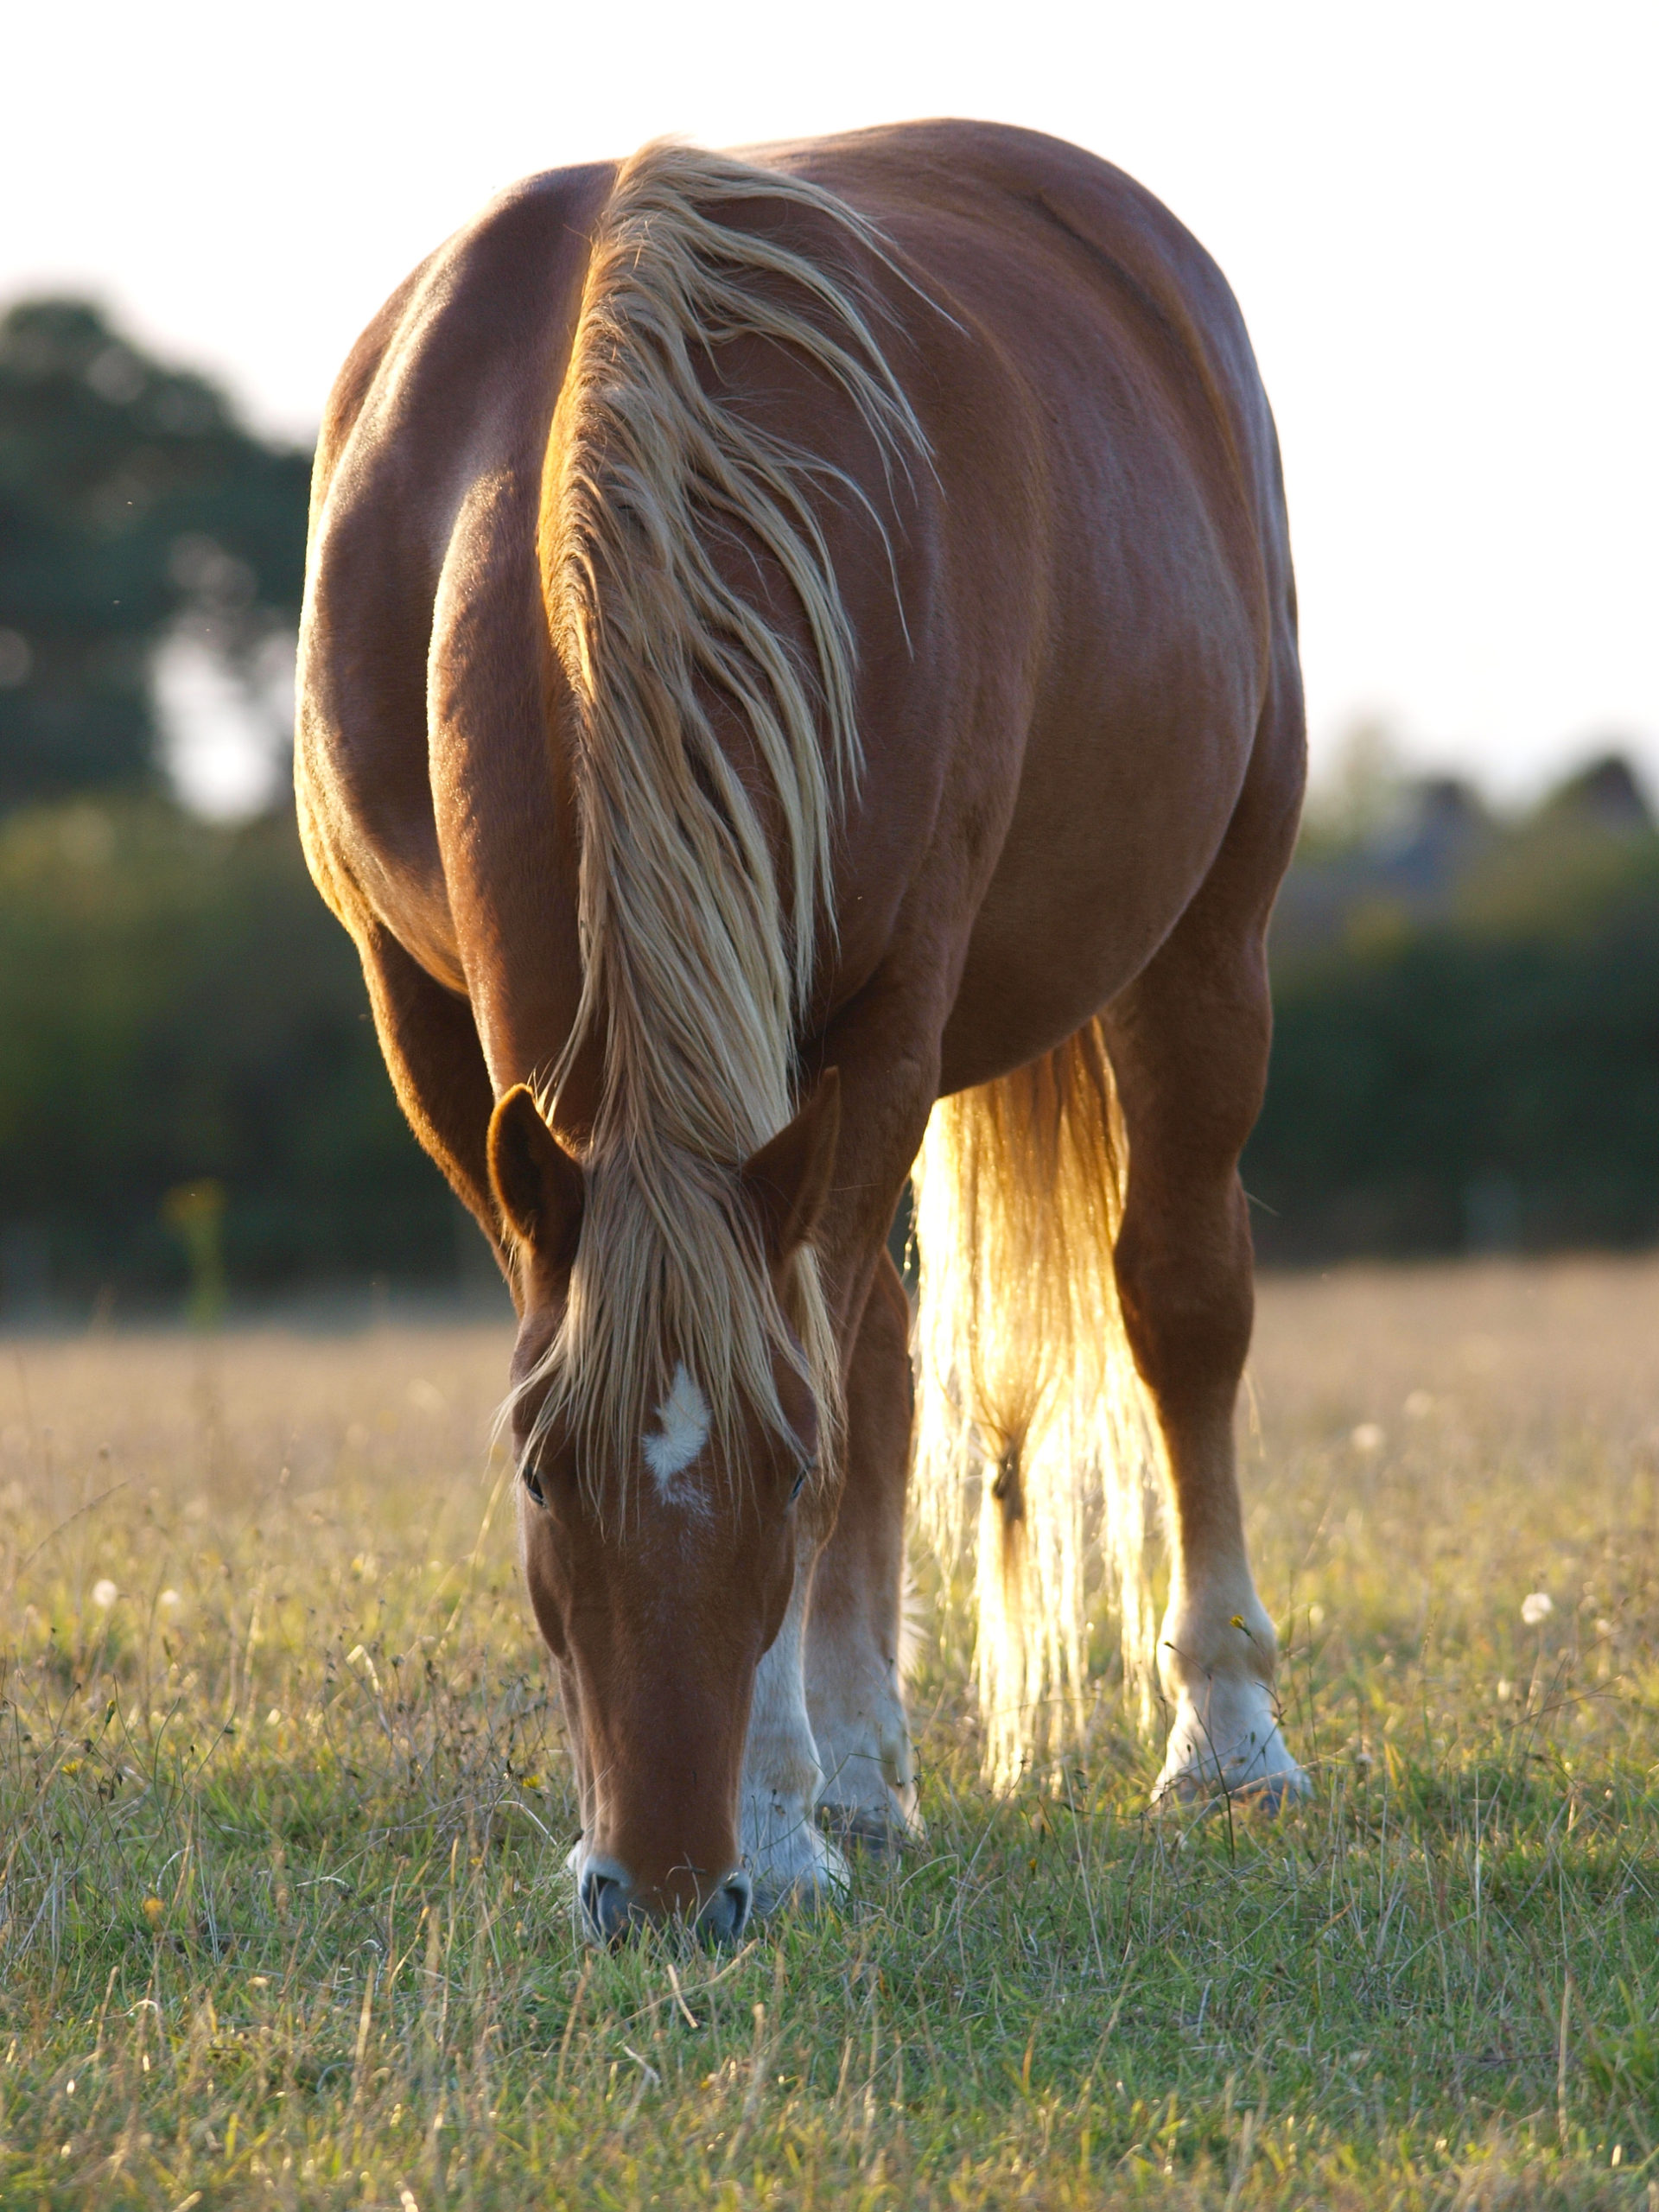 How to recognize Insulin Resistance in horses